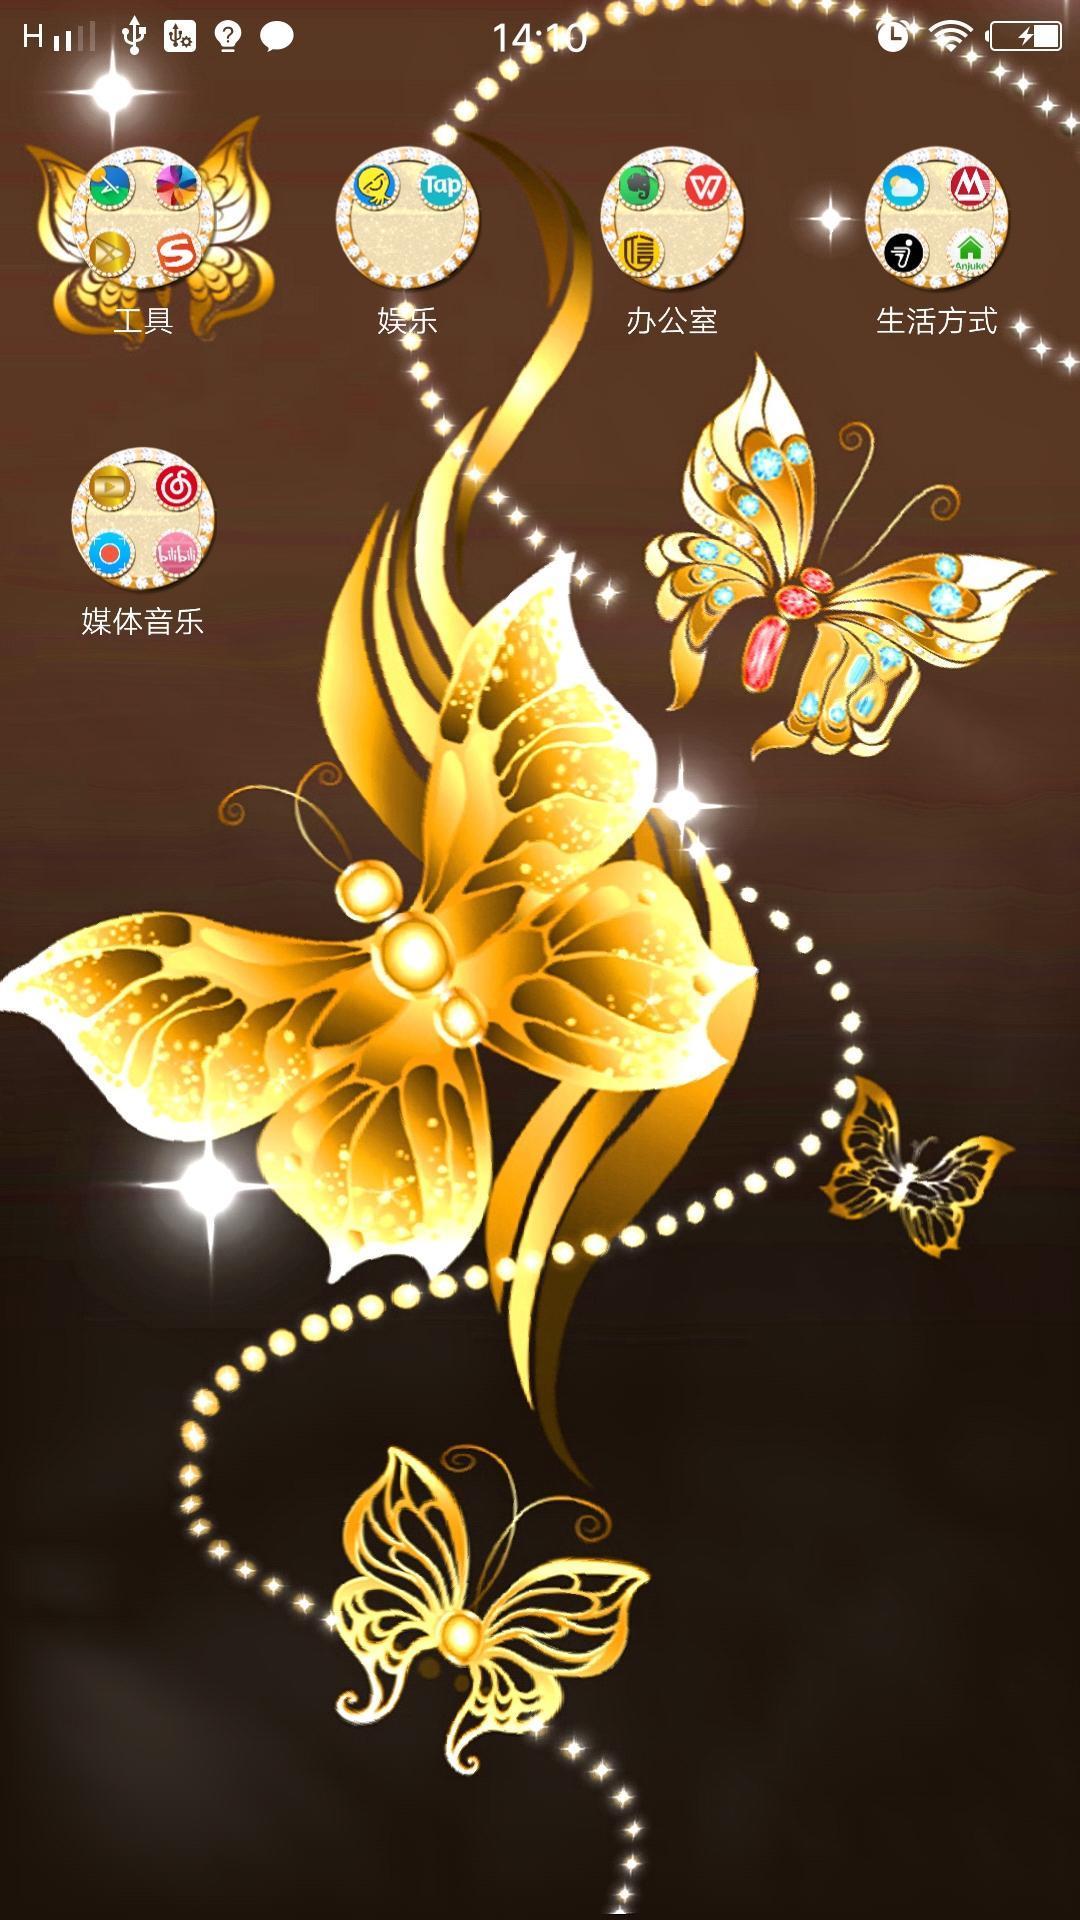 3D Golden ButterFly Launcher Wallpaper Theme for Android